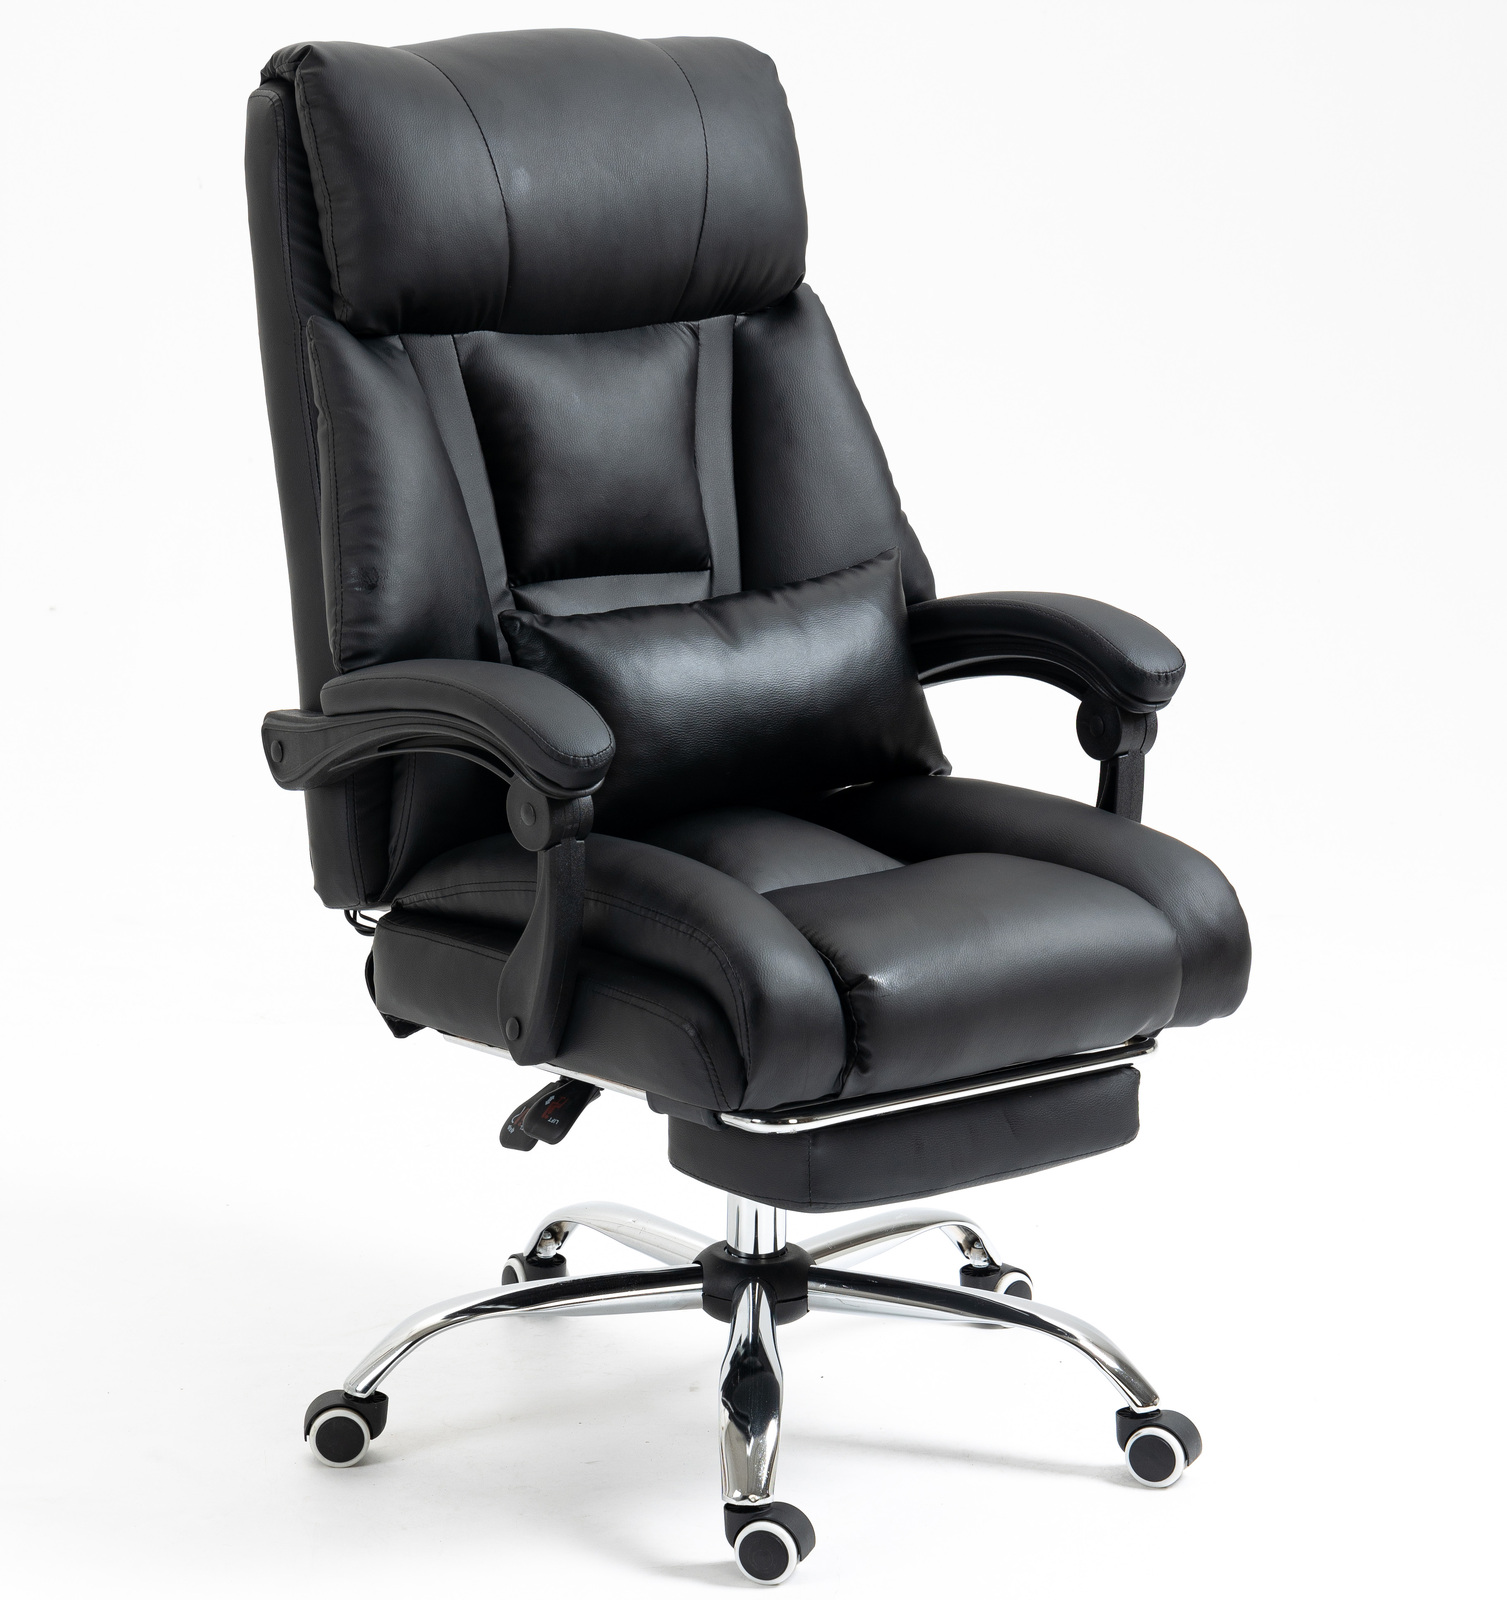 Director Deluxe Plush Executive Reclining Office Chair with Foot Rest (Black)